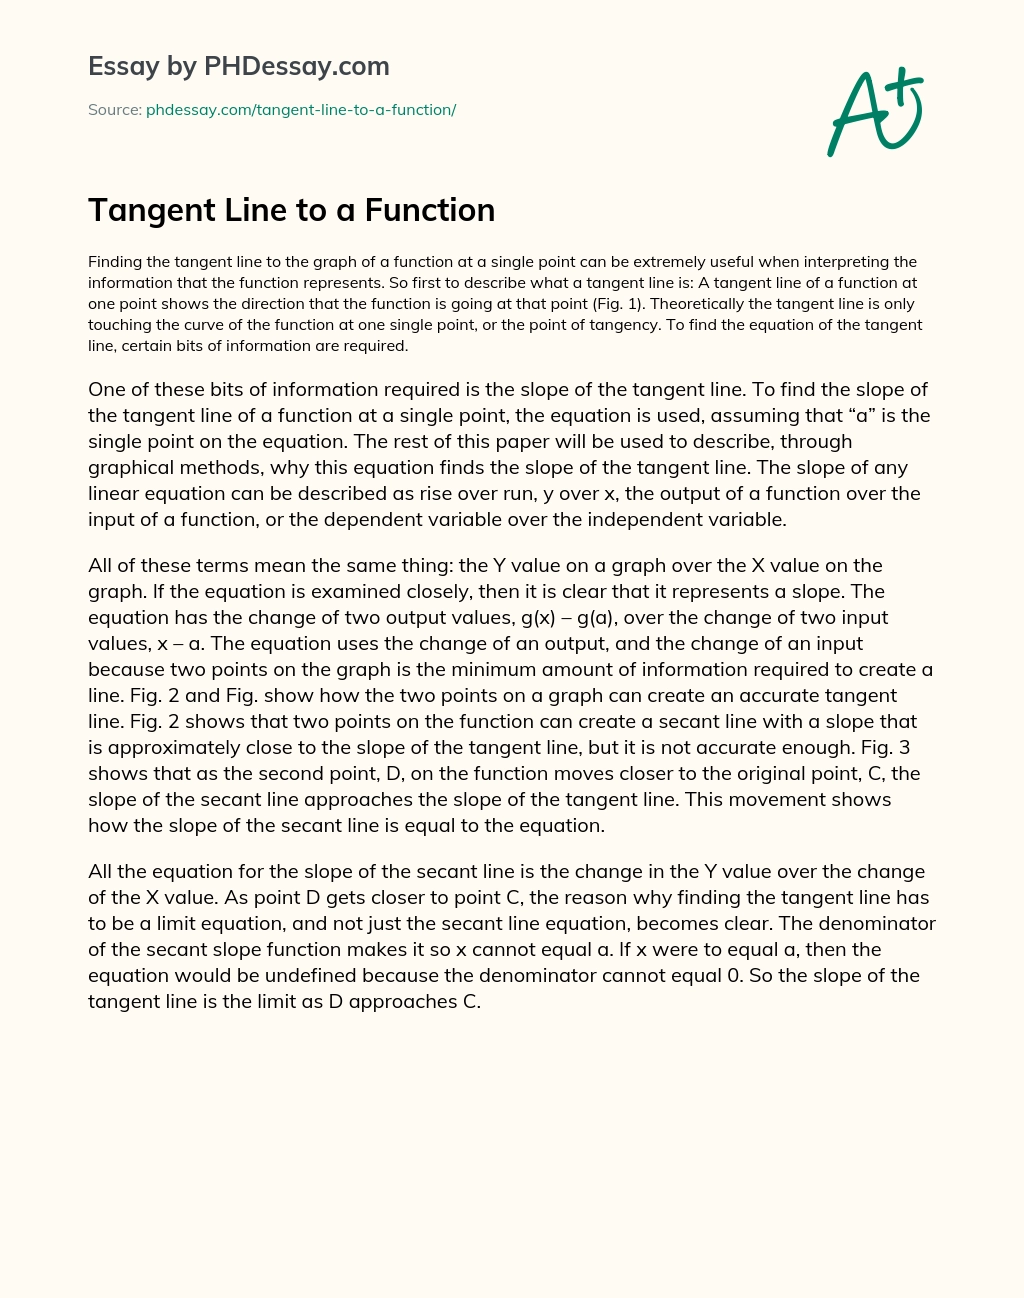 Tangent Line to a Function essay